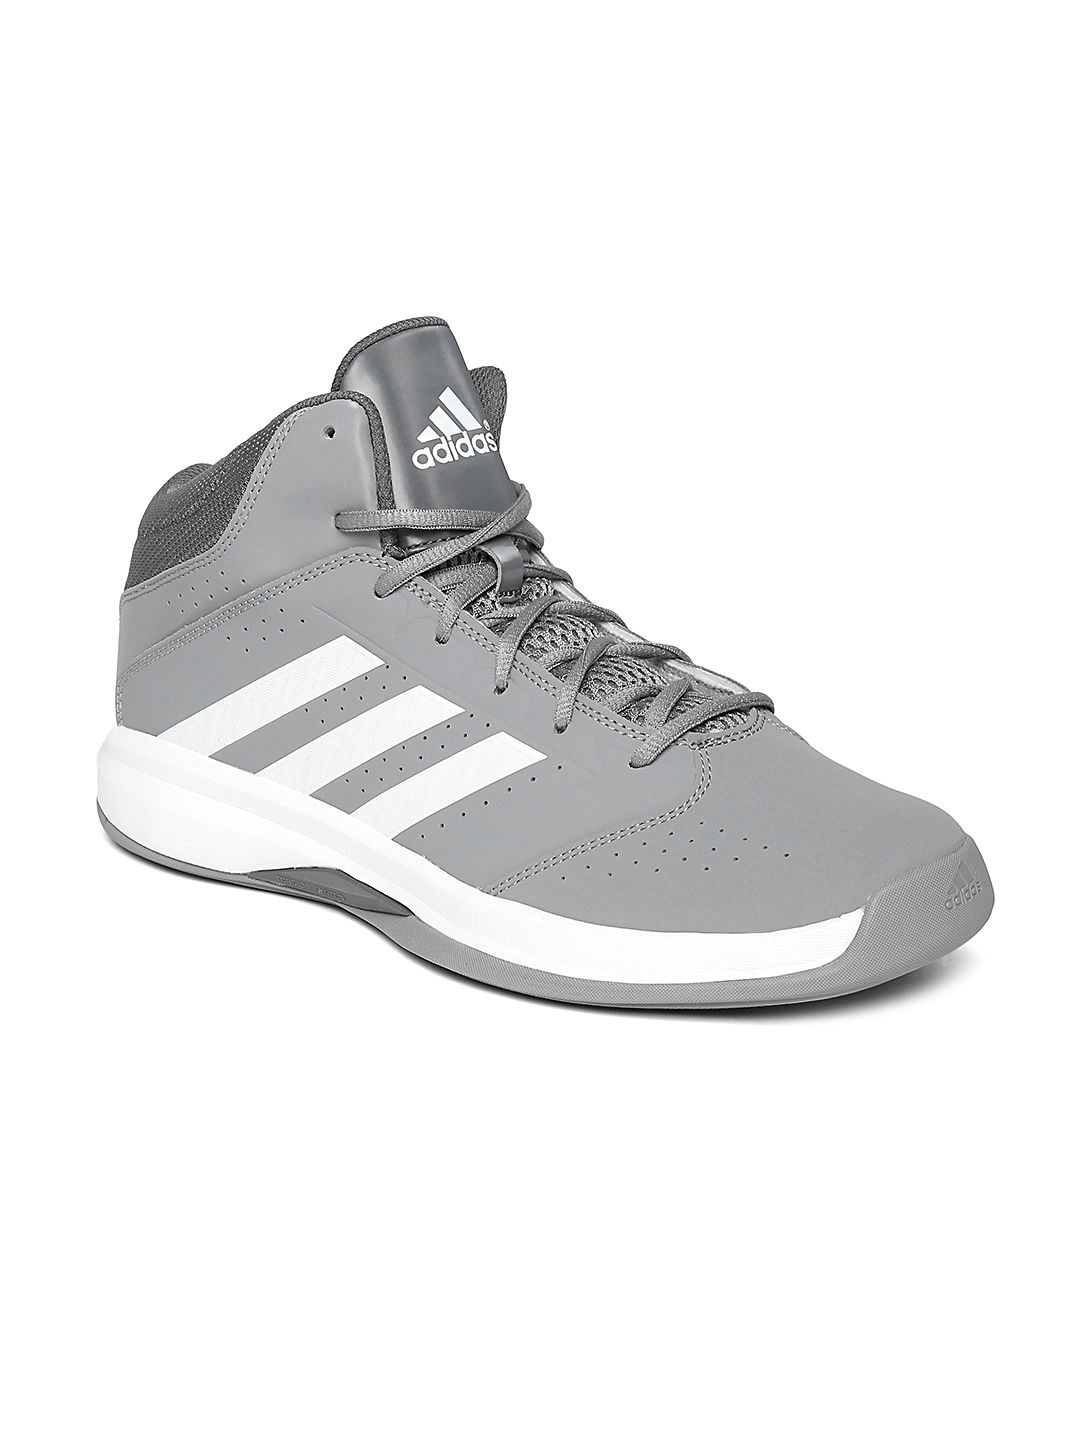 Buy ADIDAS Men Grey Isolation 2 Basketball Shoes - Sports Shoes for Men ...